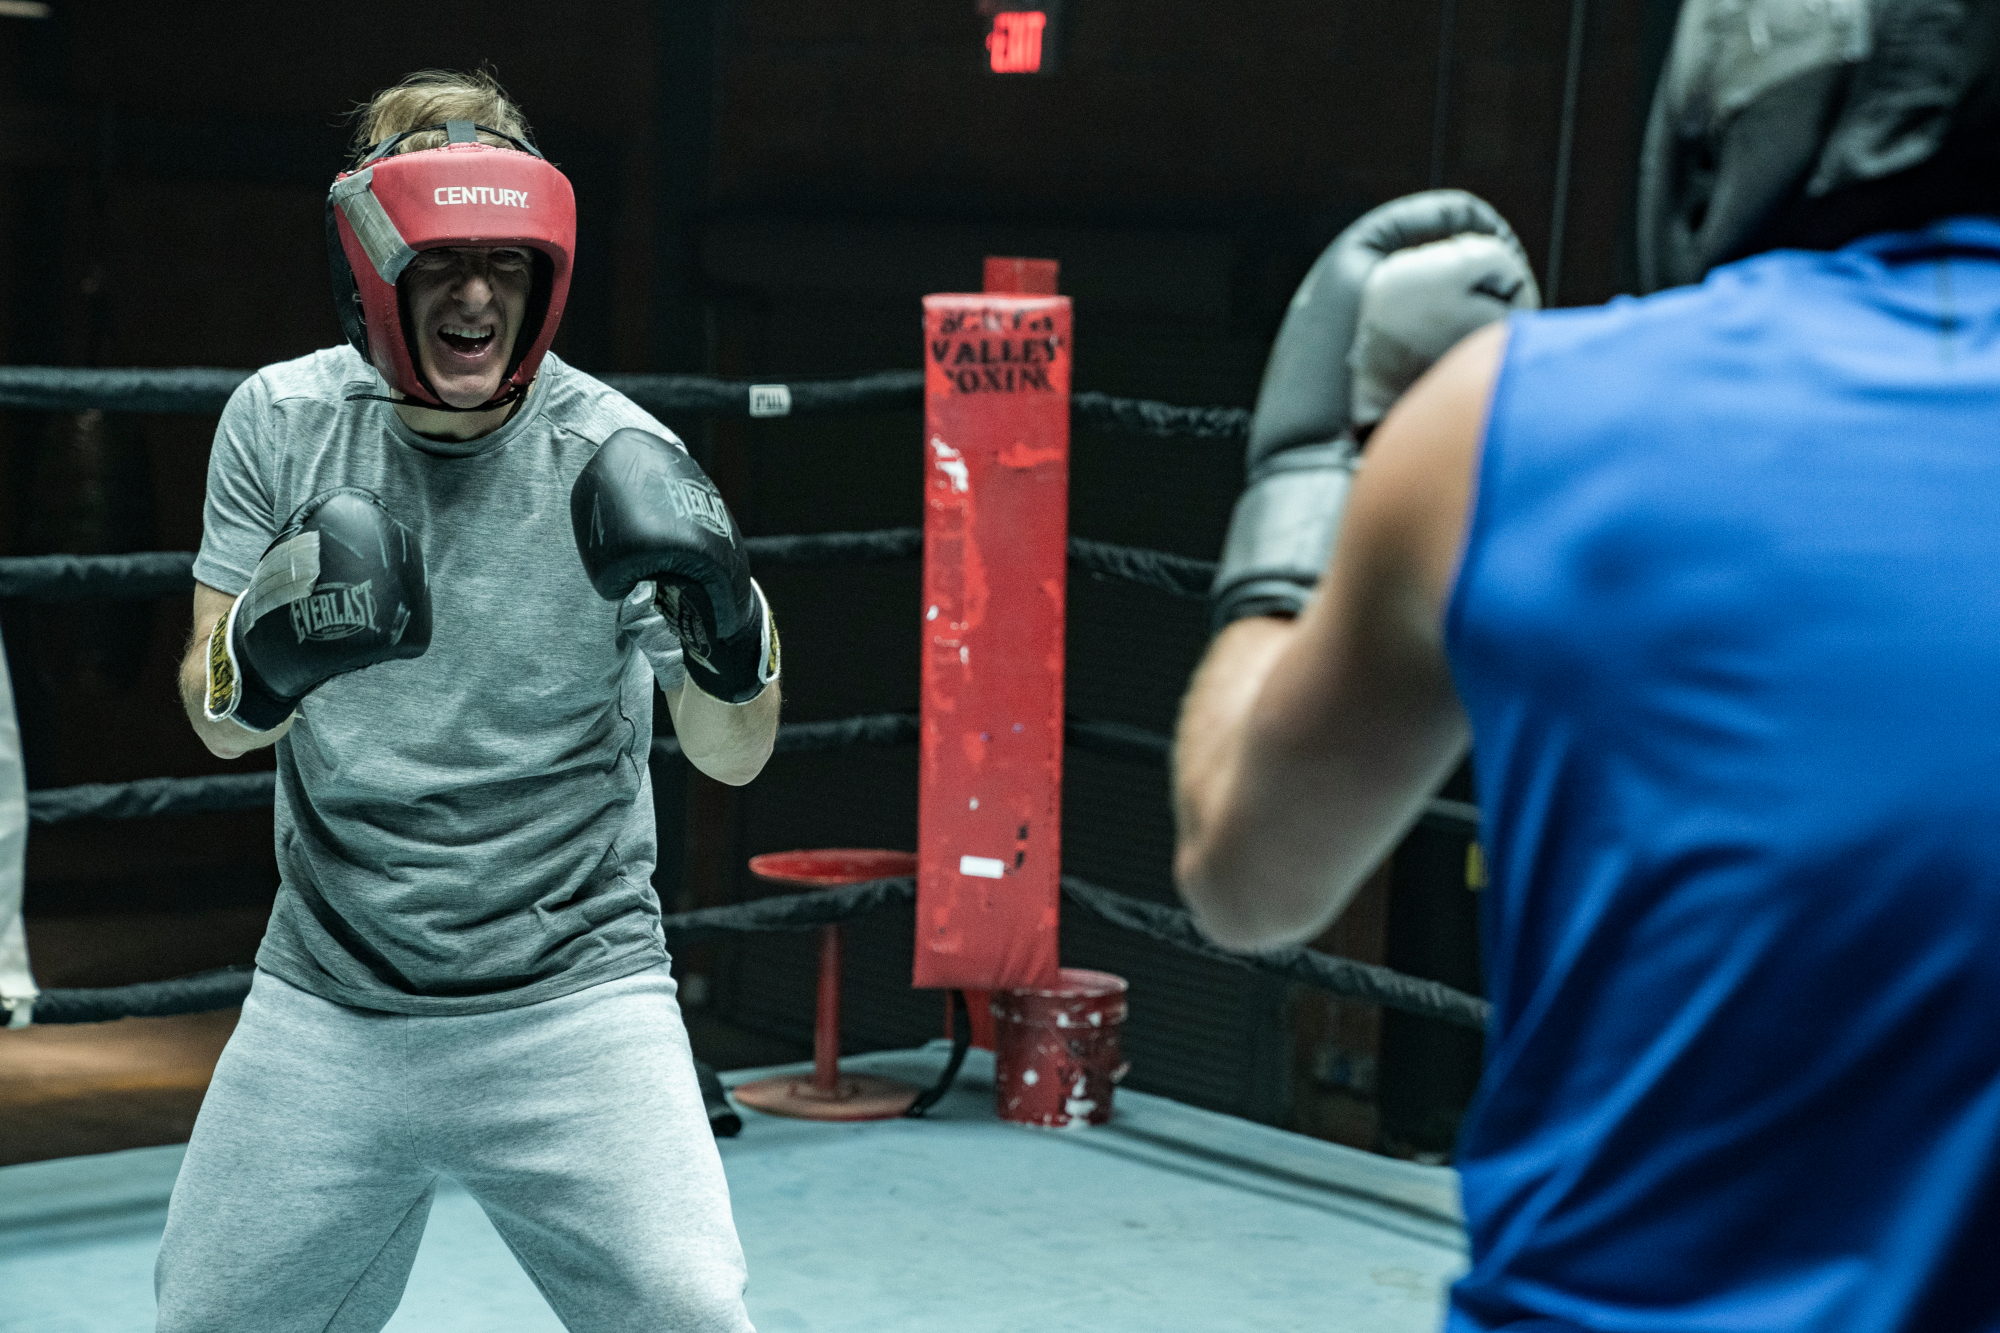 Bob Odenkirk and Patrick Fabian as Jimmy McGill and Howard Hamlin in 'Better Call Saul' Season 6's boxing scene. Howard is wearing a blue shirt and has his back to the camera, and Jimmy is holding up his fists, ready to fight.